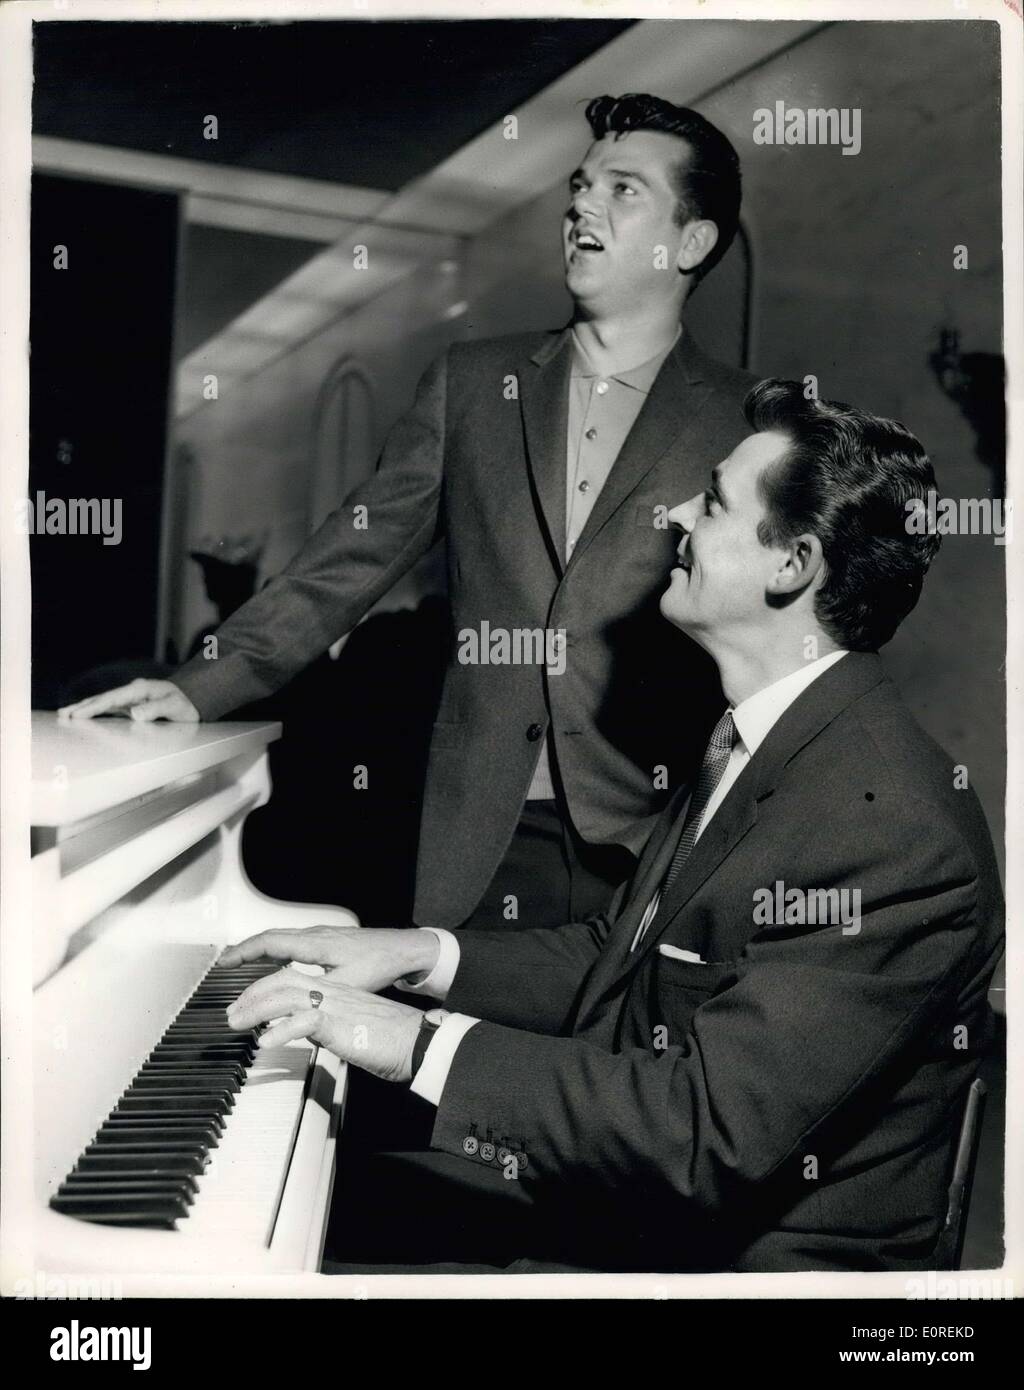 May 15, 1959 - Russ Conway - and Conway Twitty get together: Russ Conway the popular British pianist - and Conway Twitty the American singers were to be seen together at the Savoy Hotel this morning. Russ Conway is appearing on the B.B.C Billy Cotton TV show - while Conway Twitty is appearing on the rival channel in ''OH-Boy'' - but both stars record for the same company E.M.I. which includes H.M.V and Colombia records. Photo shows Russ Conway accompanies Conway Twitty on the piano - when they met at the Savoy Hotel this morning. Stock Photo